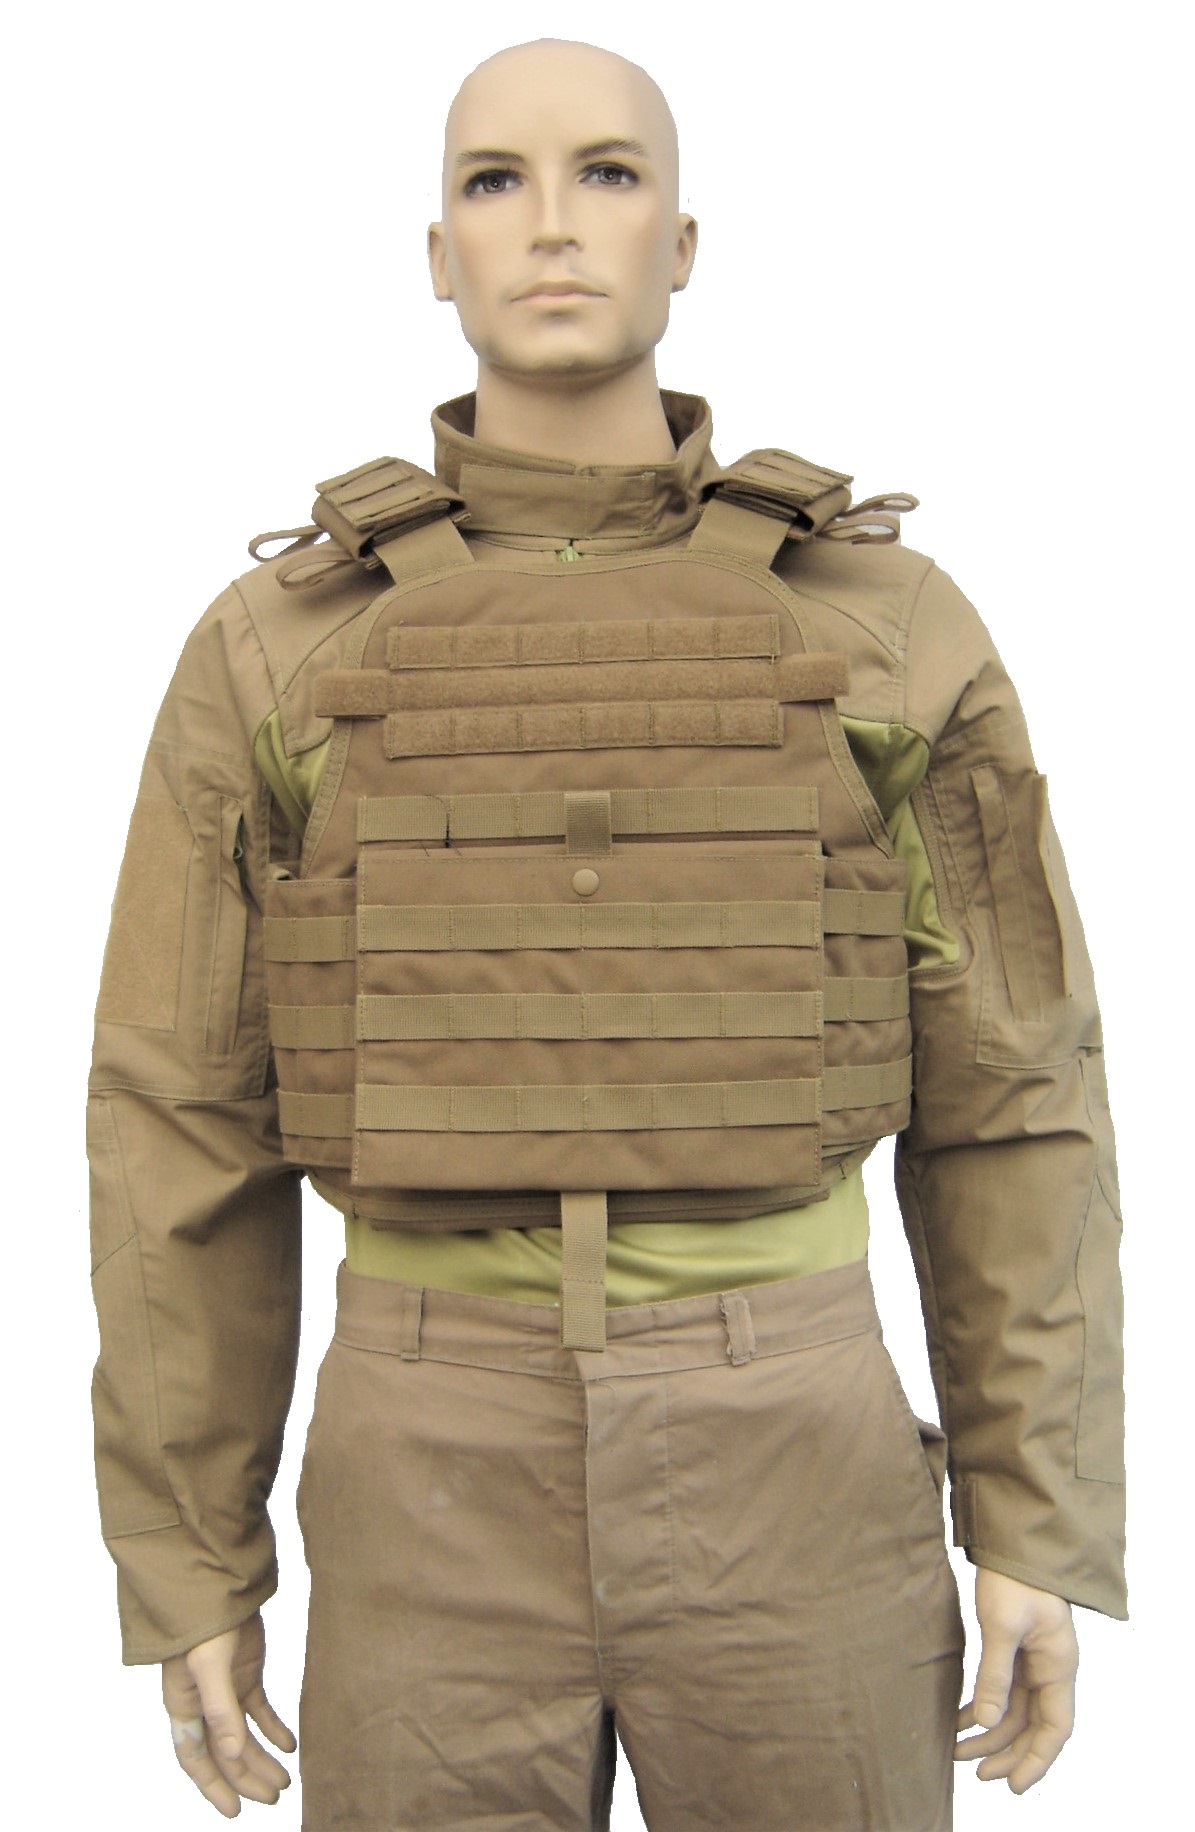 Operator NIJ-4 Stand Alone (250x300mm) Plate Carrier Coyote